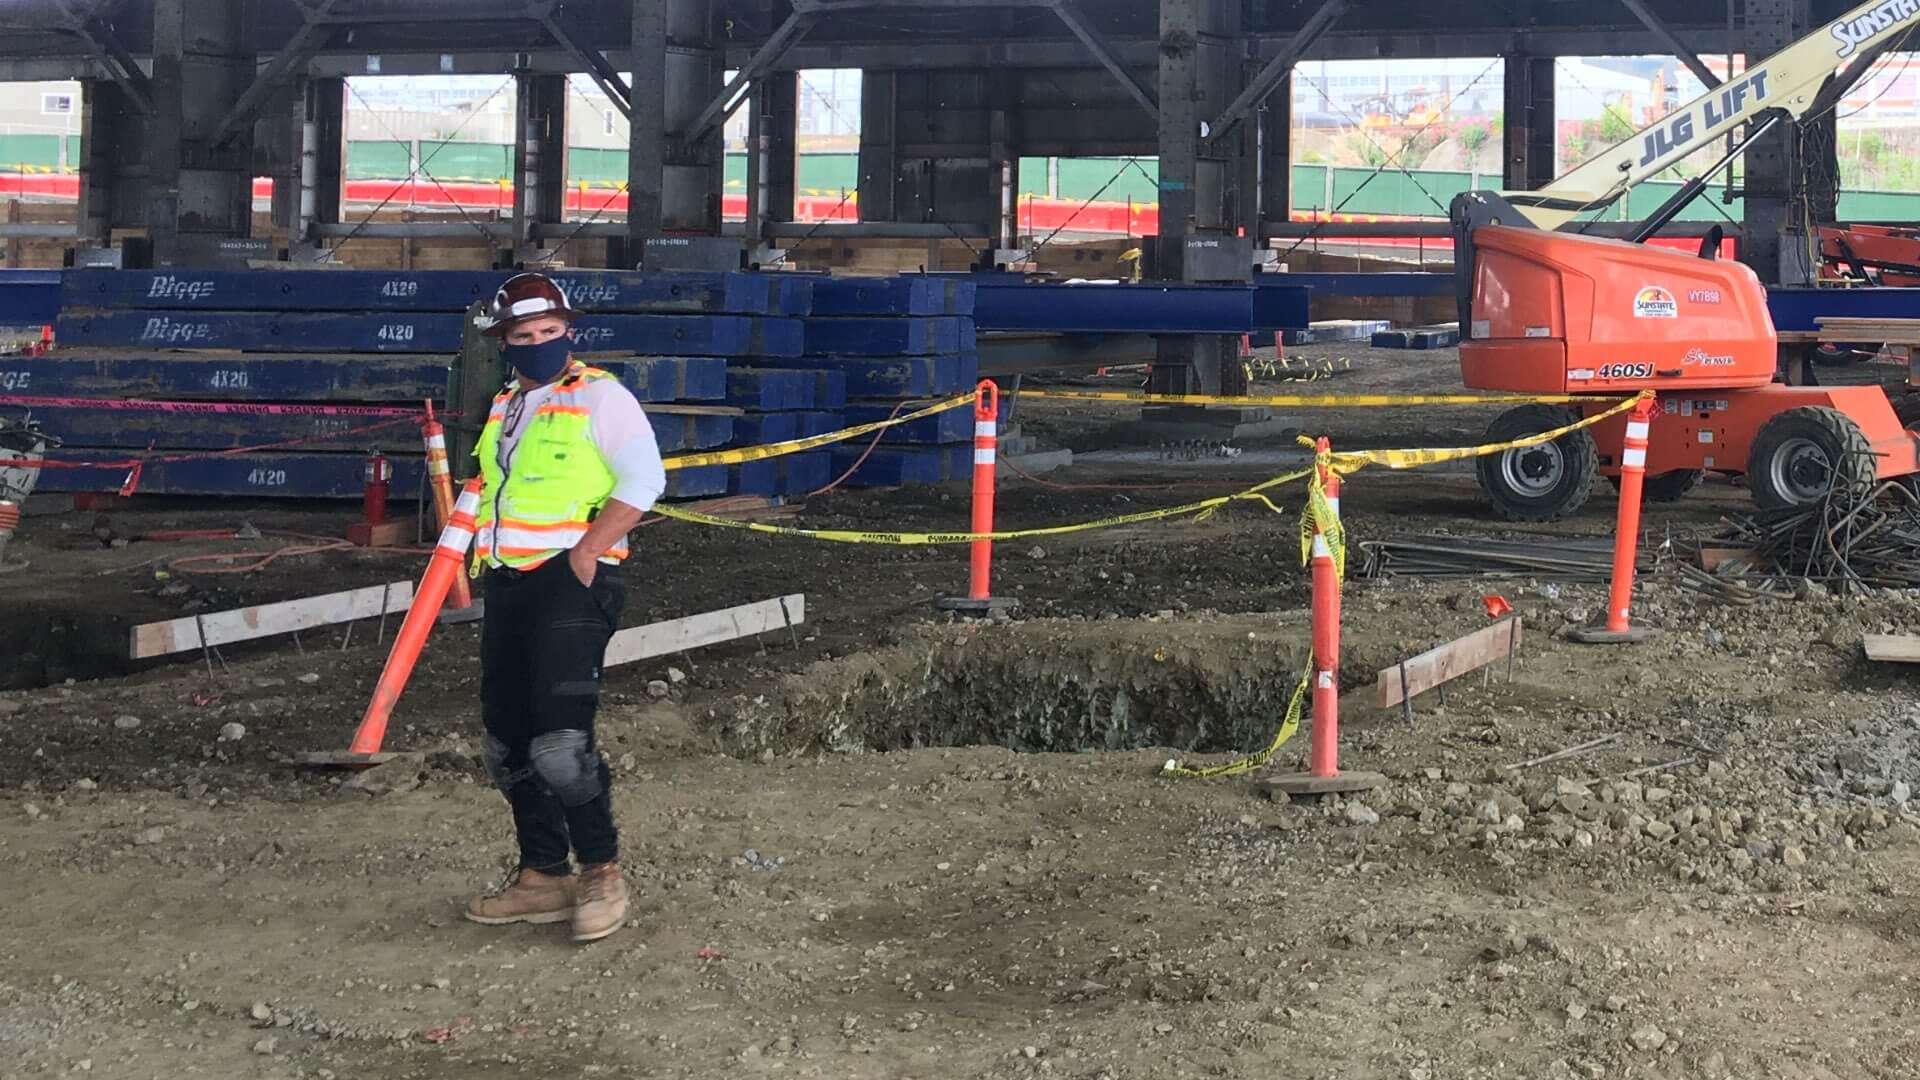 Workers on a jobsite